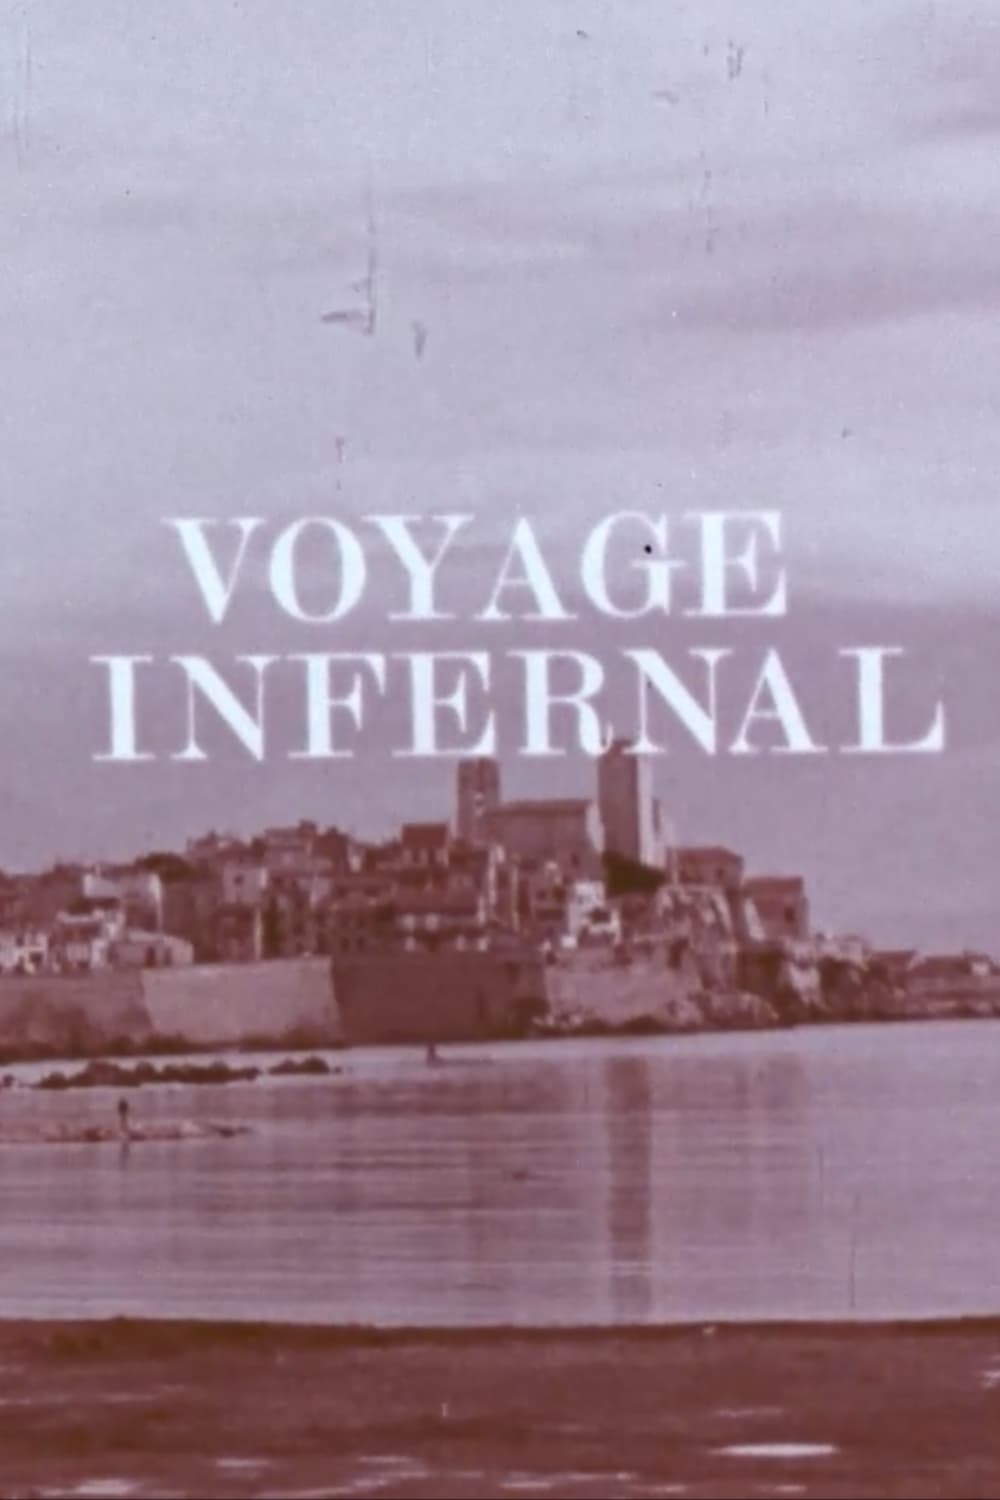 The Infernal Voyage